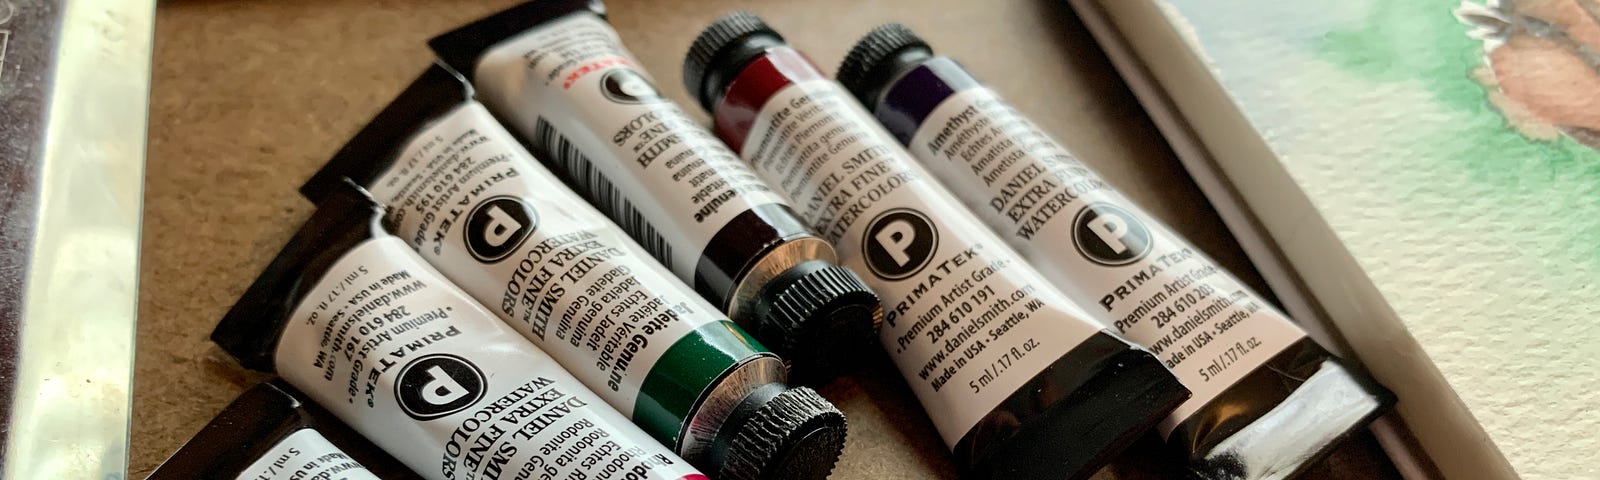 Tubes of watercolor paint by maker Daniel Smith